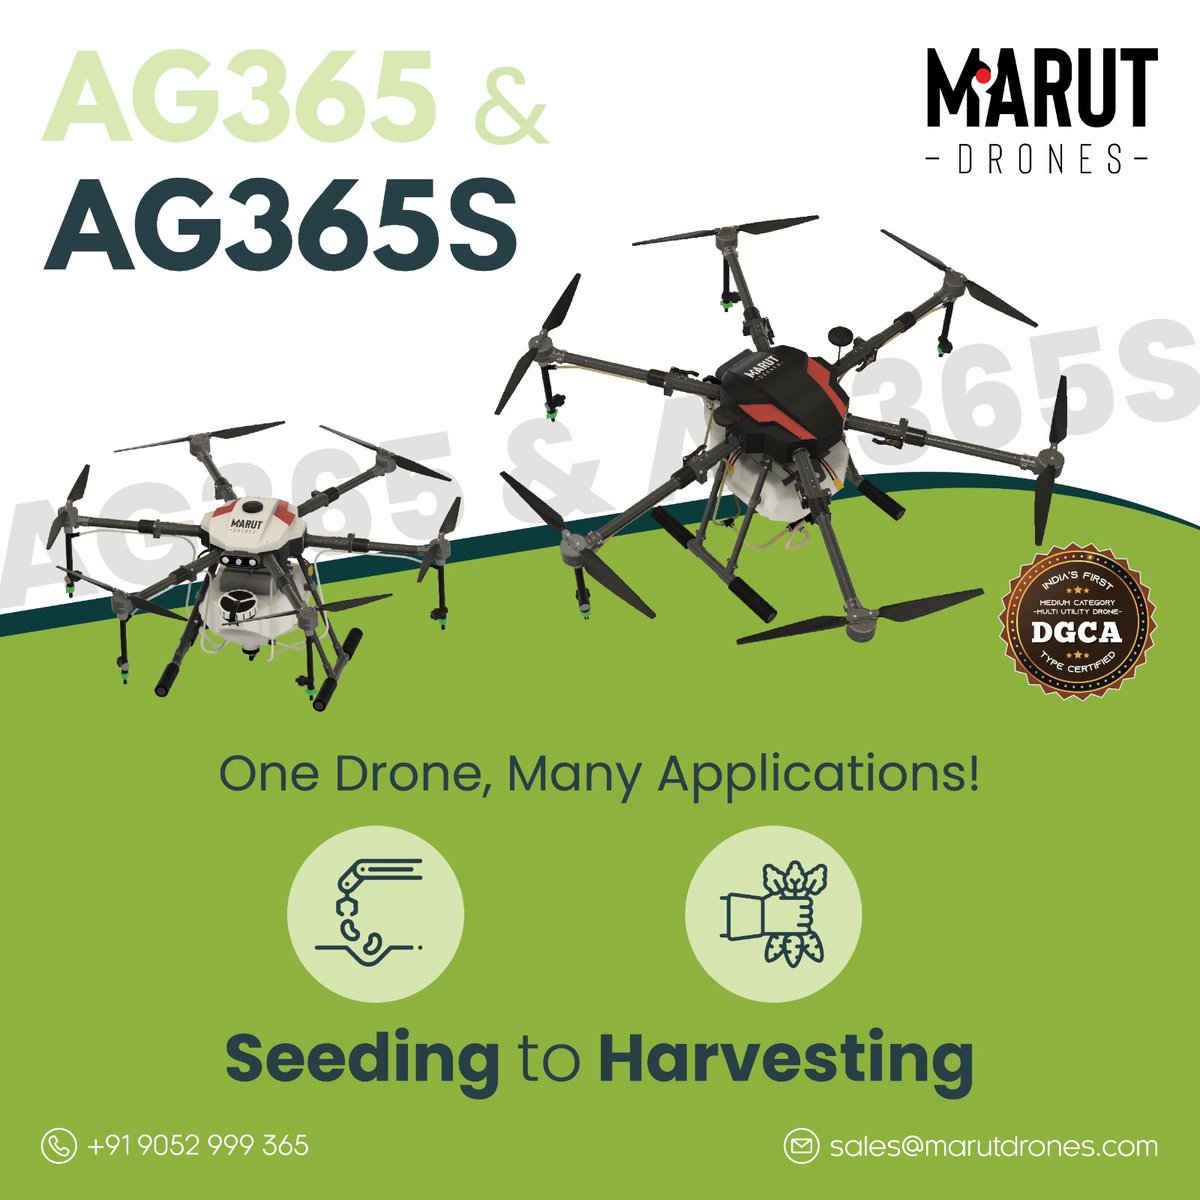 Revolutionize farming with Marut Drones AG365 & AG365S. Effortless precision from seeding to harvest. Unlock insights and elevate your farming game. @marutdrones #MarutDrones #DroneTech #PrecisionAgri #FarmingRevolution